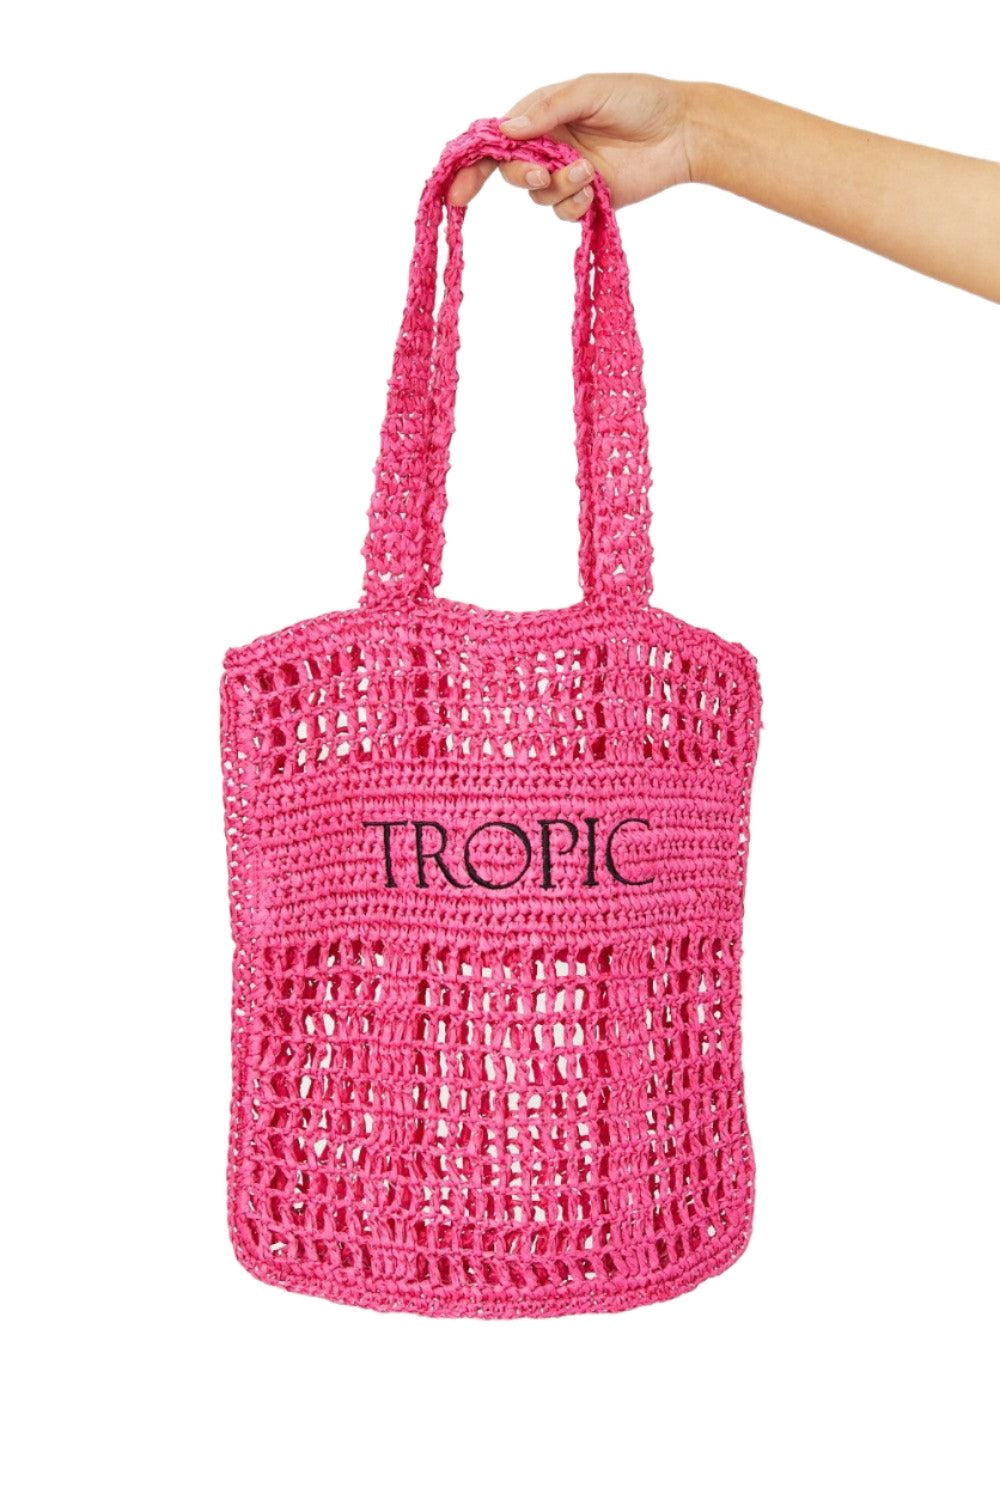 Wallets, Handbags & Accessories Fame Tropic Babe Staw Tote Bag